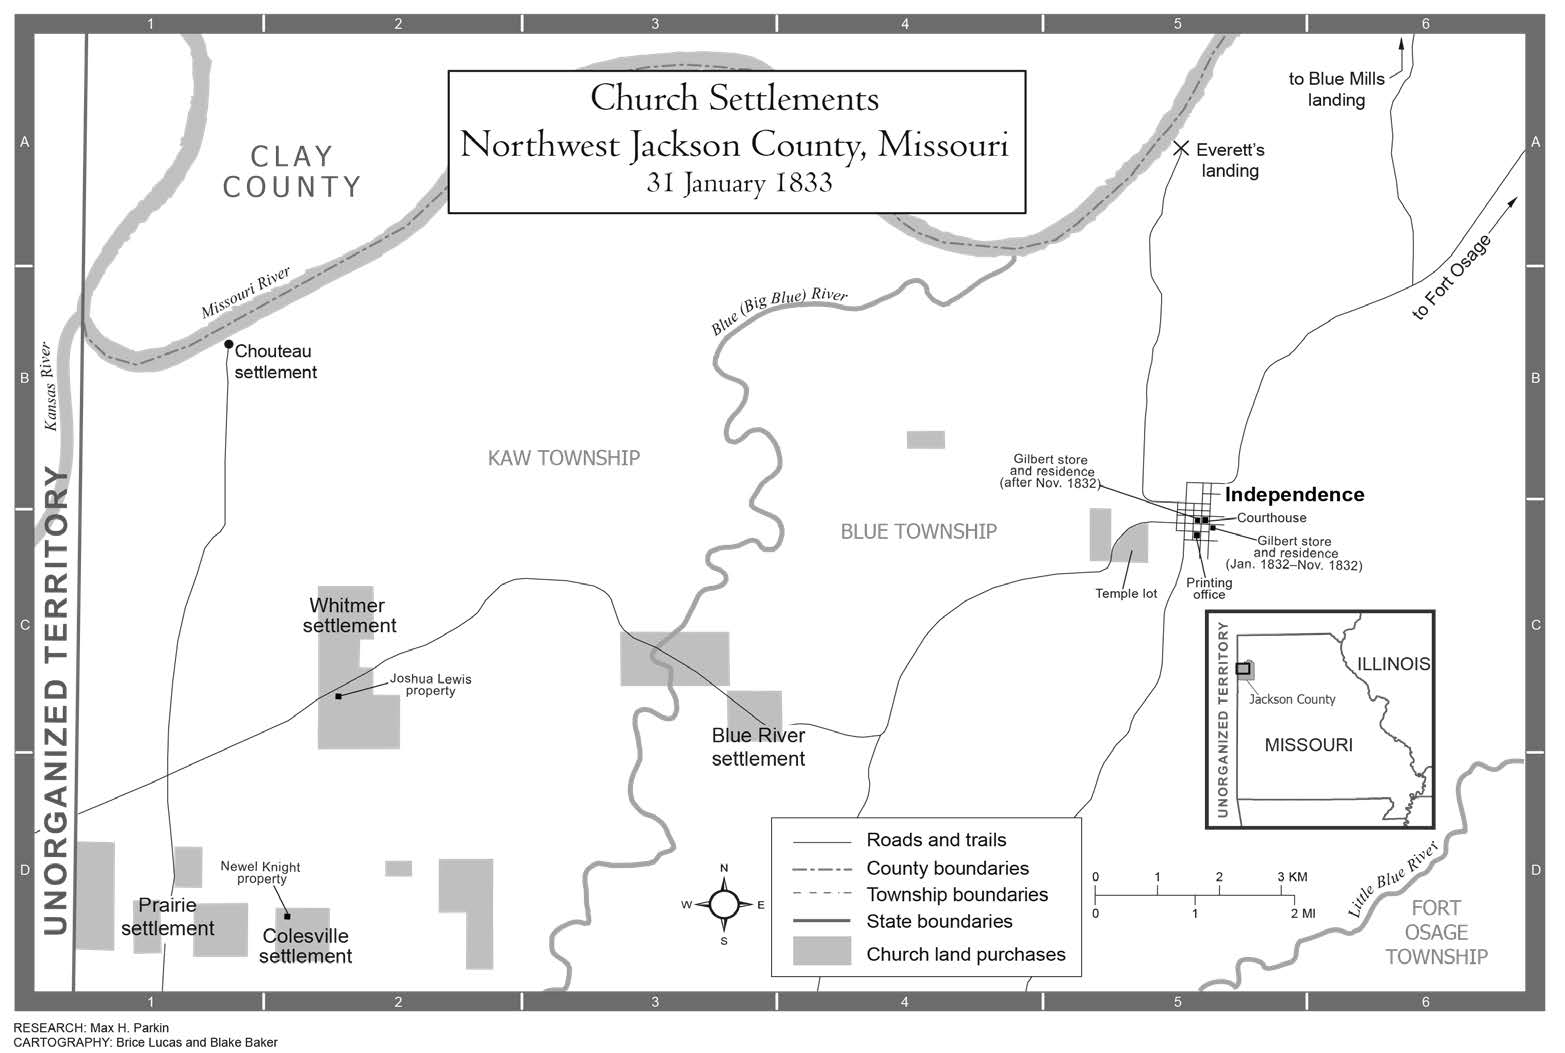 Church Settlements in Northwest Jackson County, Missouri, 31 January 1833. Courtesy of the Joseph Smith Papers Project.